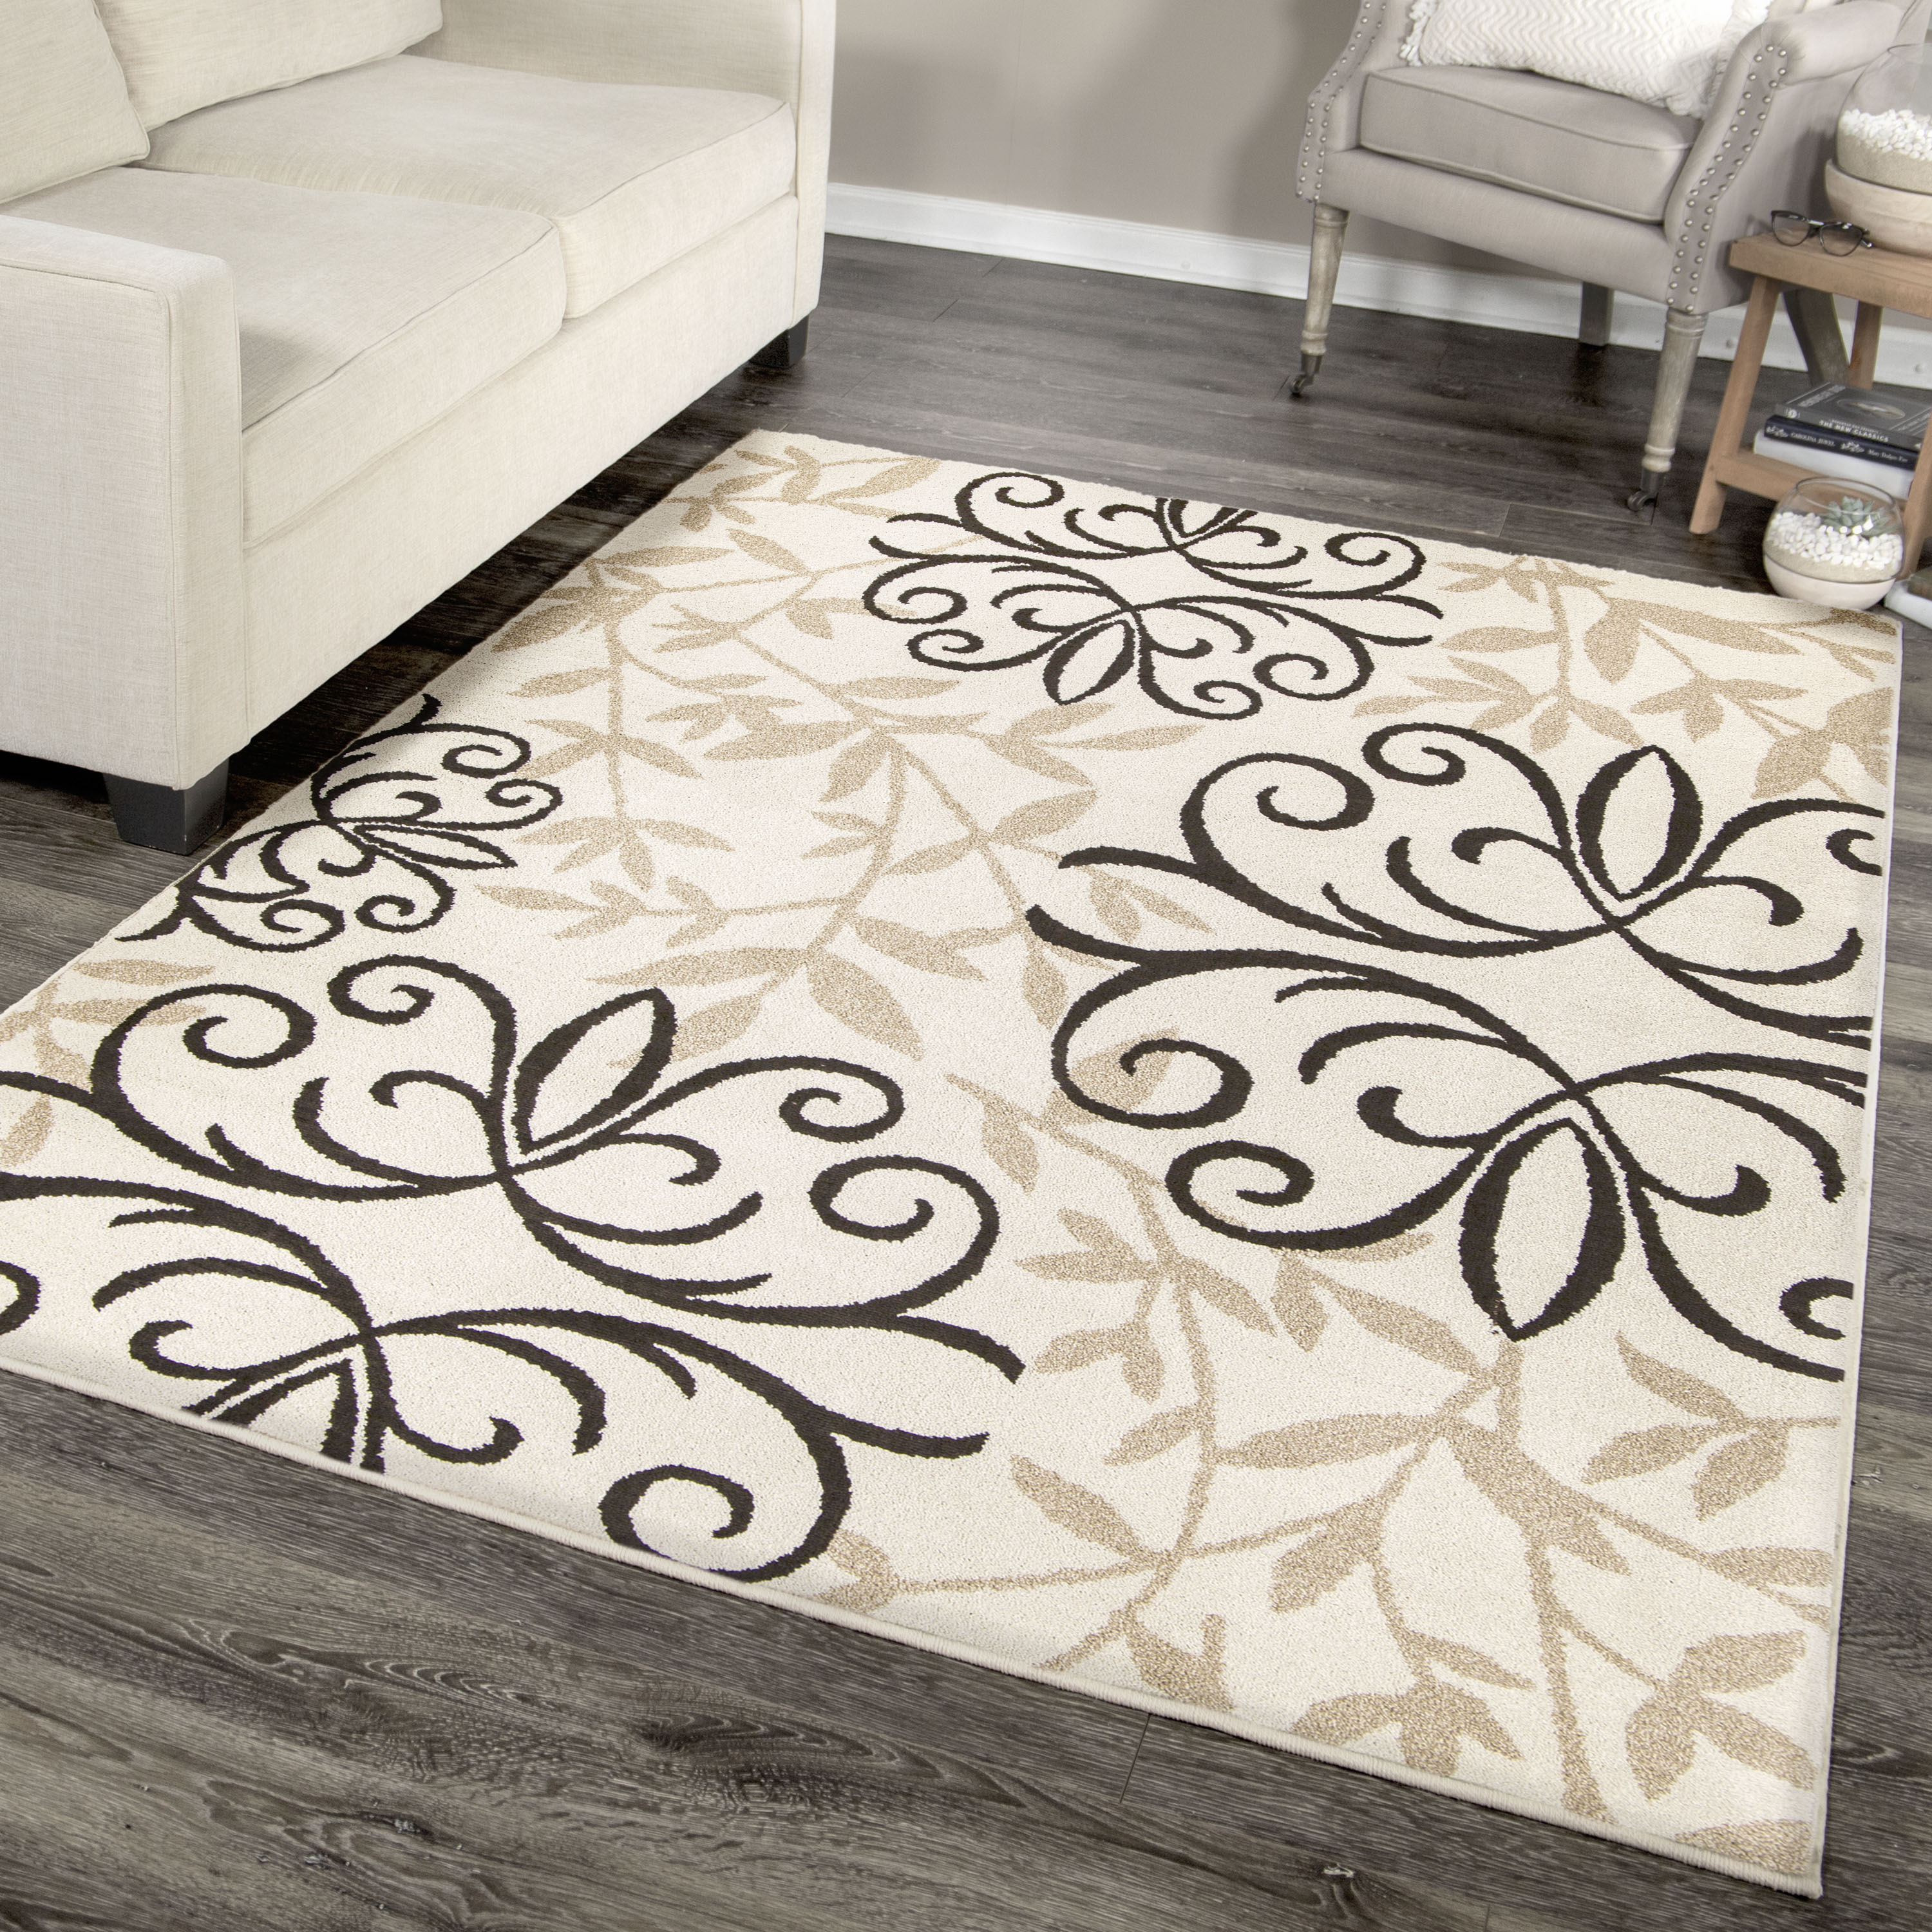 Better Homes & Gardens Iron Fleur 6'7" X 9'8" Off White Floral Rug - image 1 of 8